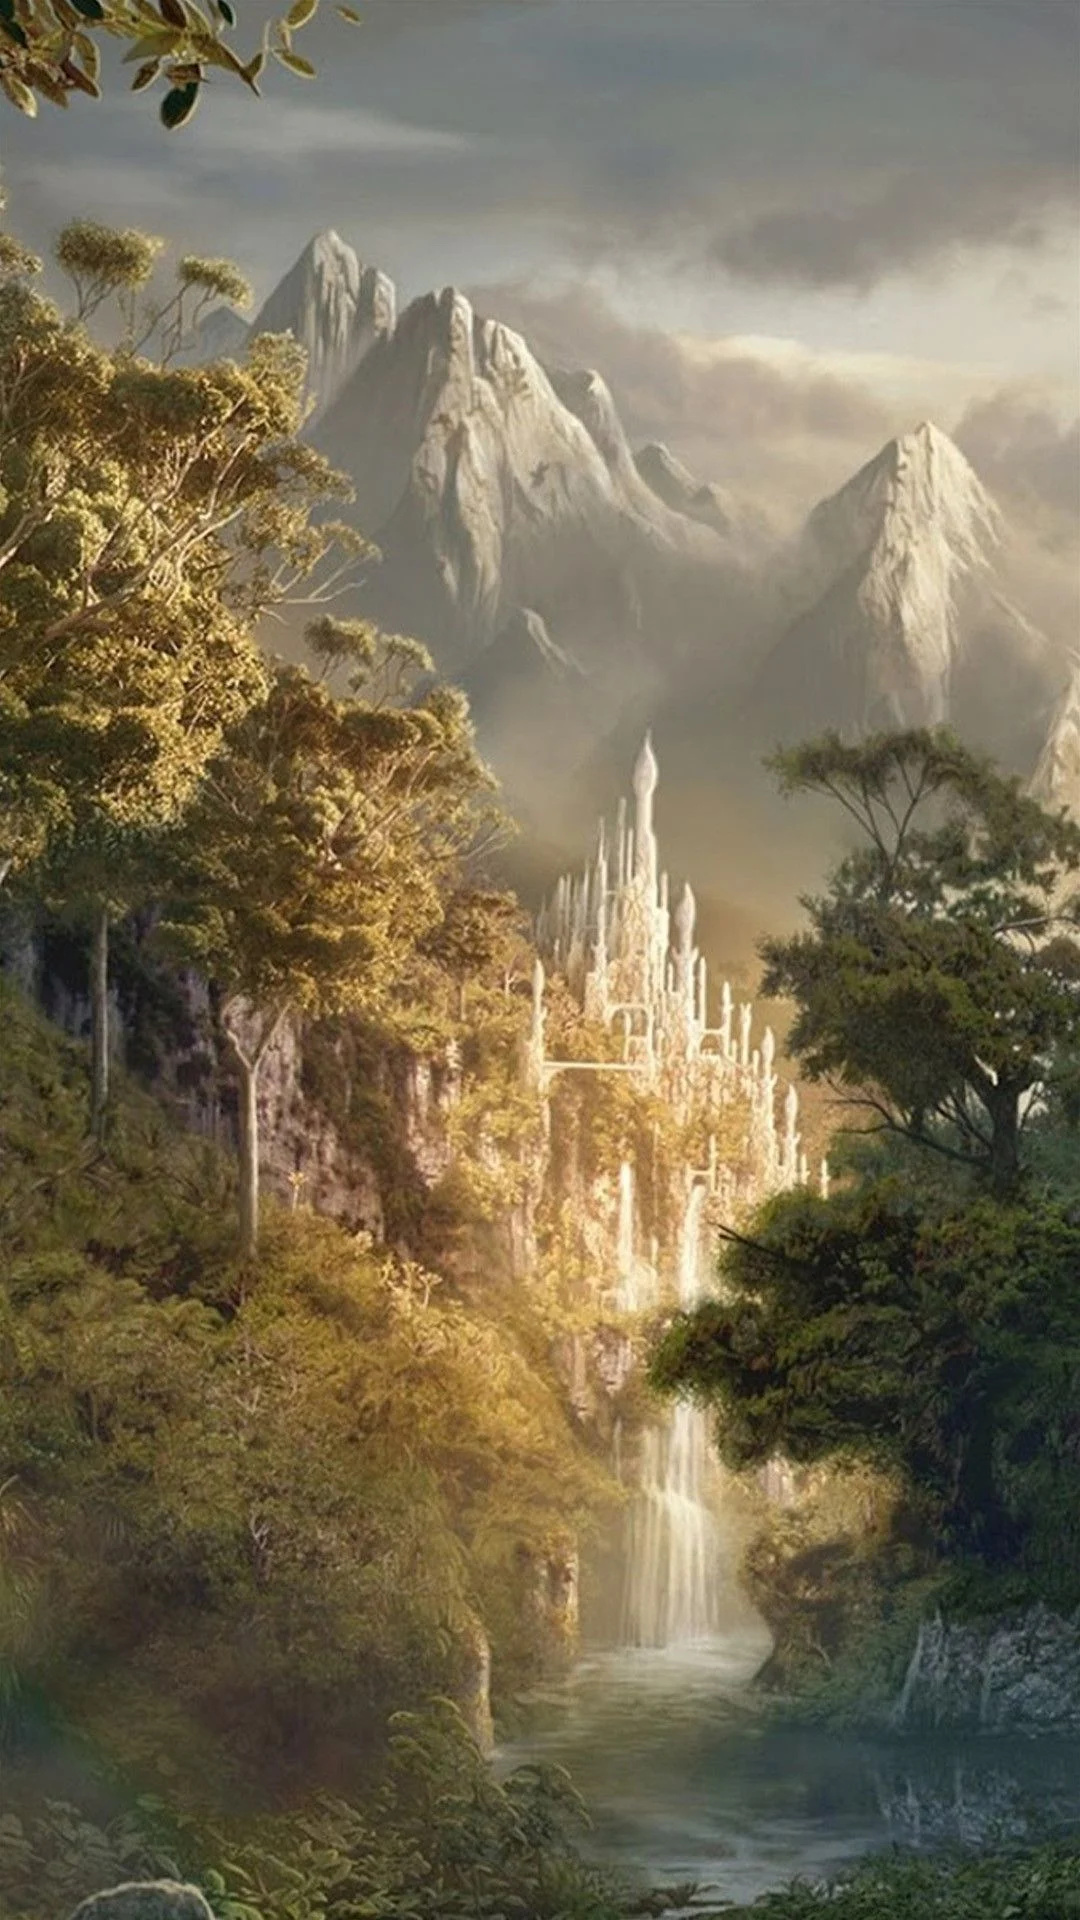 Lord of the Rings, iPhone wallpapers, Top picks, Middle-earth on your screen, 1080x1920 Full HD Handy